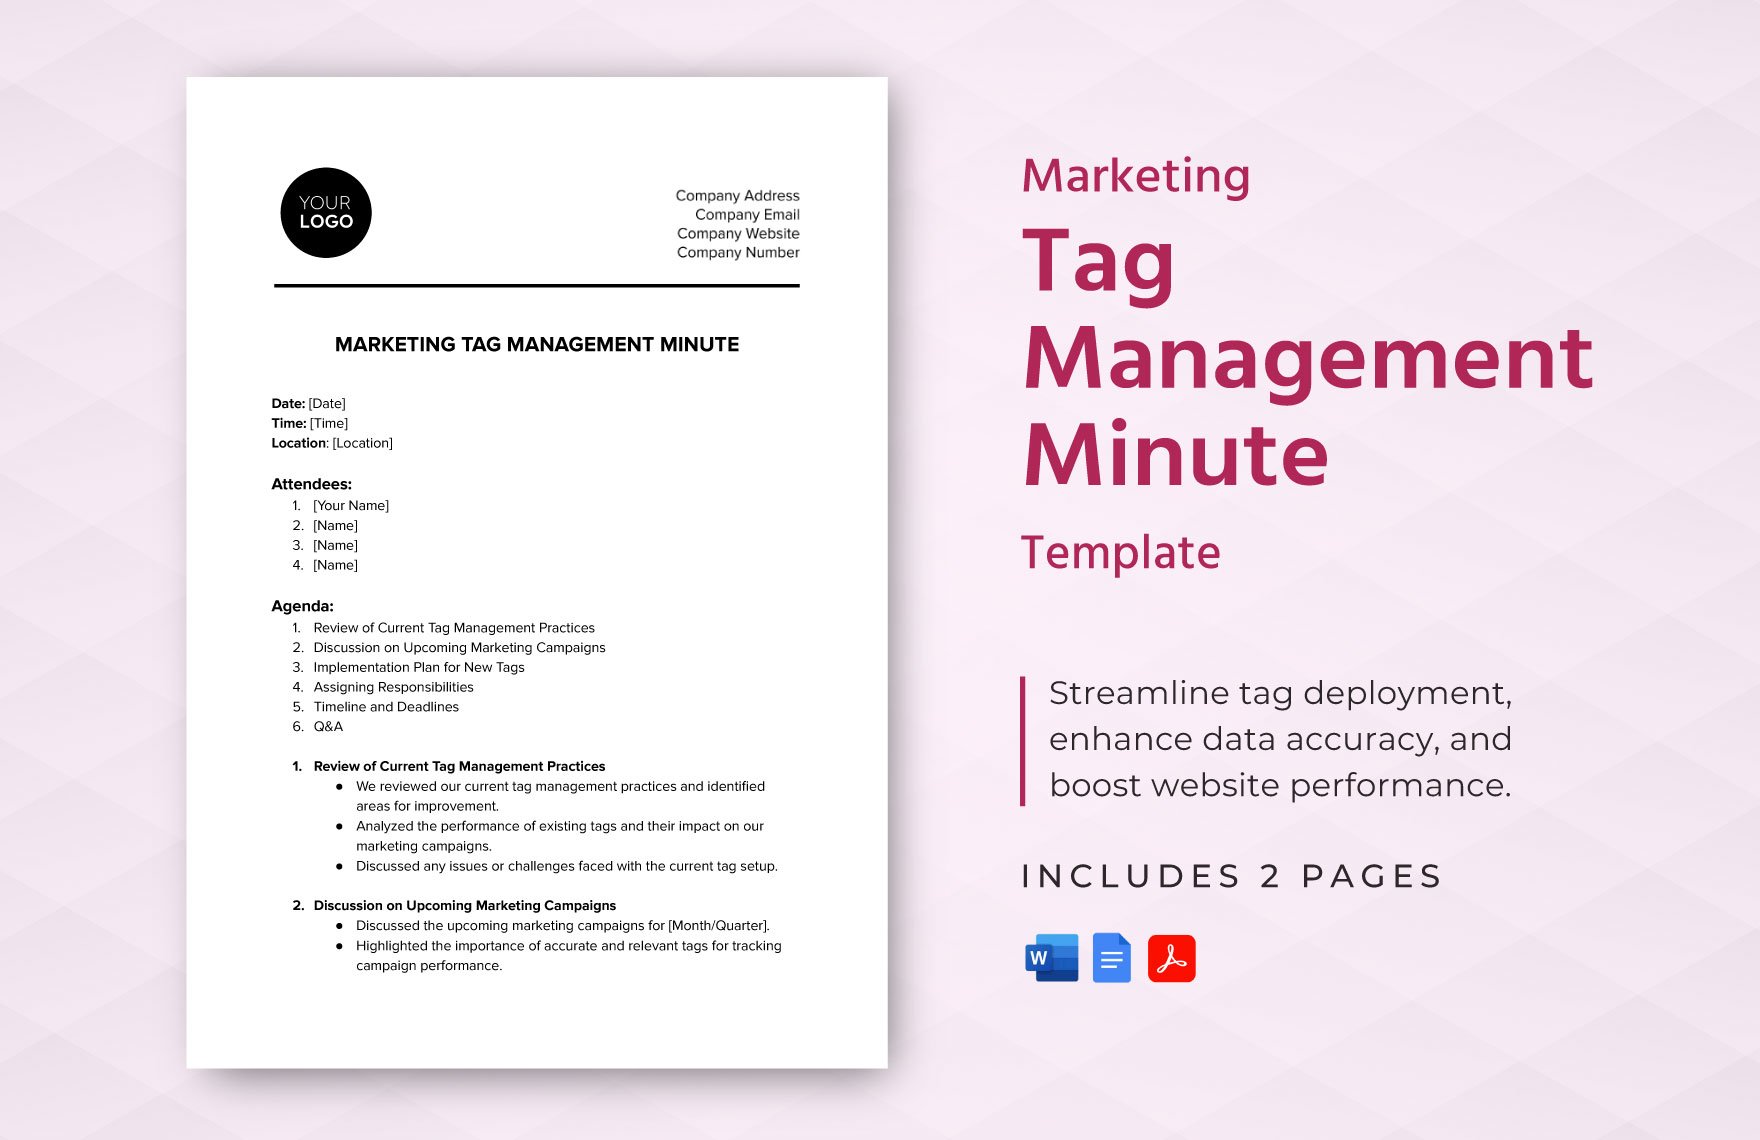 Marketing Tag Management Minute Template in Word, Google Docs, PDF